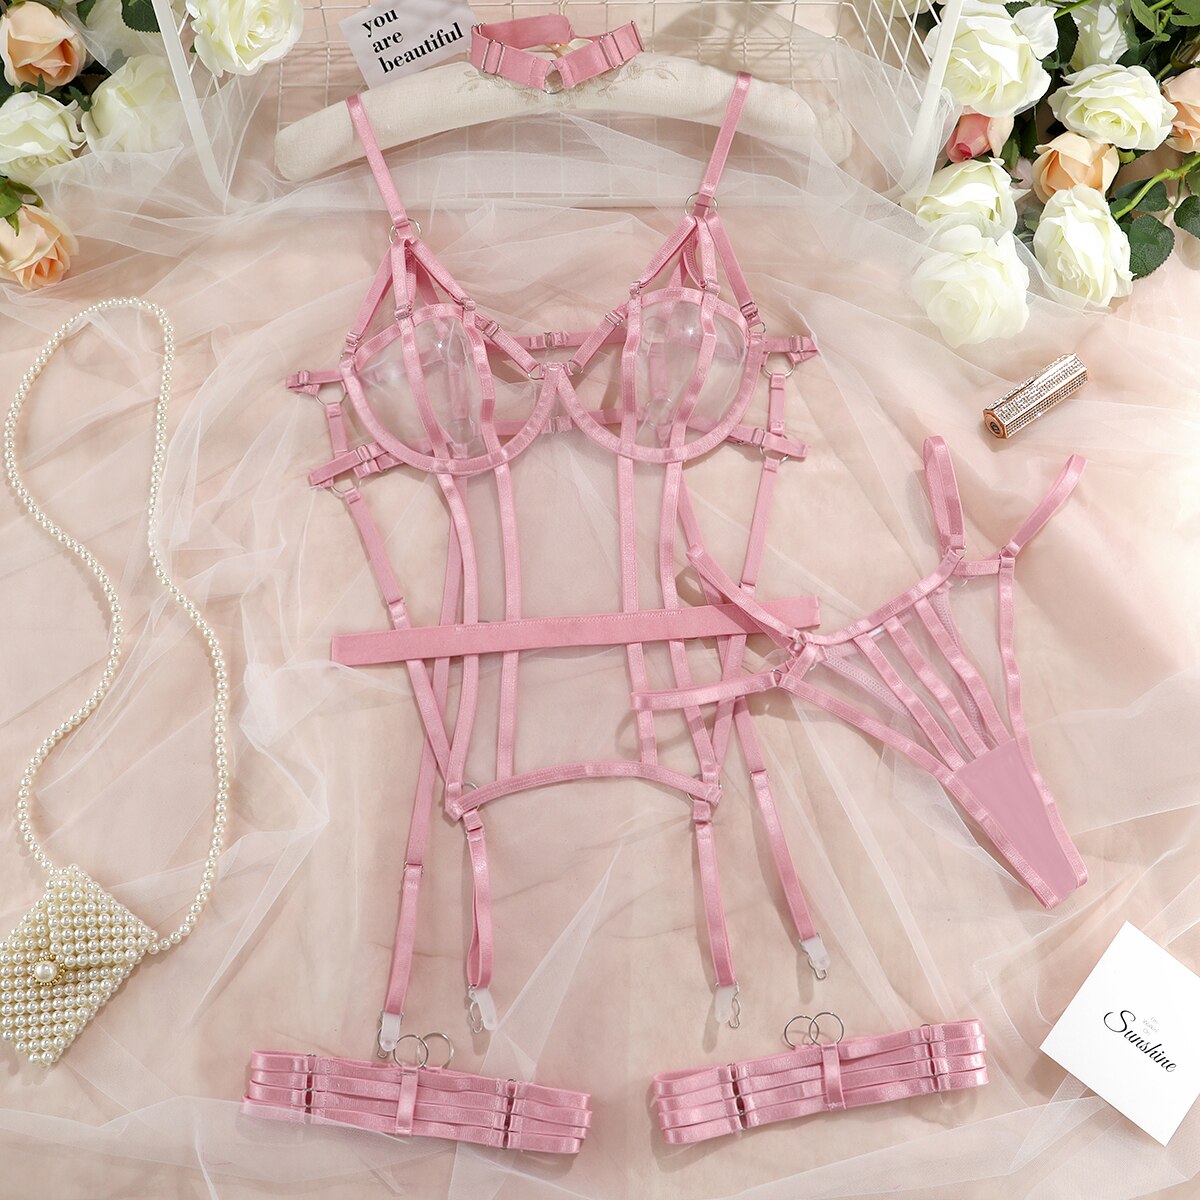 3-Piece Exotic Lingerie Set - Kawaii Stop - 3-Piece, Adult Games, Bandage, Brief Set, Choker, Cut Out, Exotic, garter, Intimates, Lingerie Set, Panties, Pink, Set, Sets, Sexy, Sexy Lingerie, Sexy Products, Transparent, Women, Women's, Women's Clothing &amp; Accessories